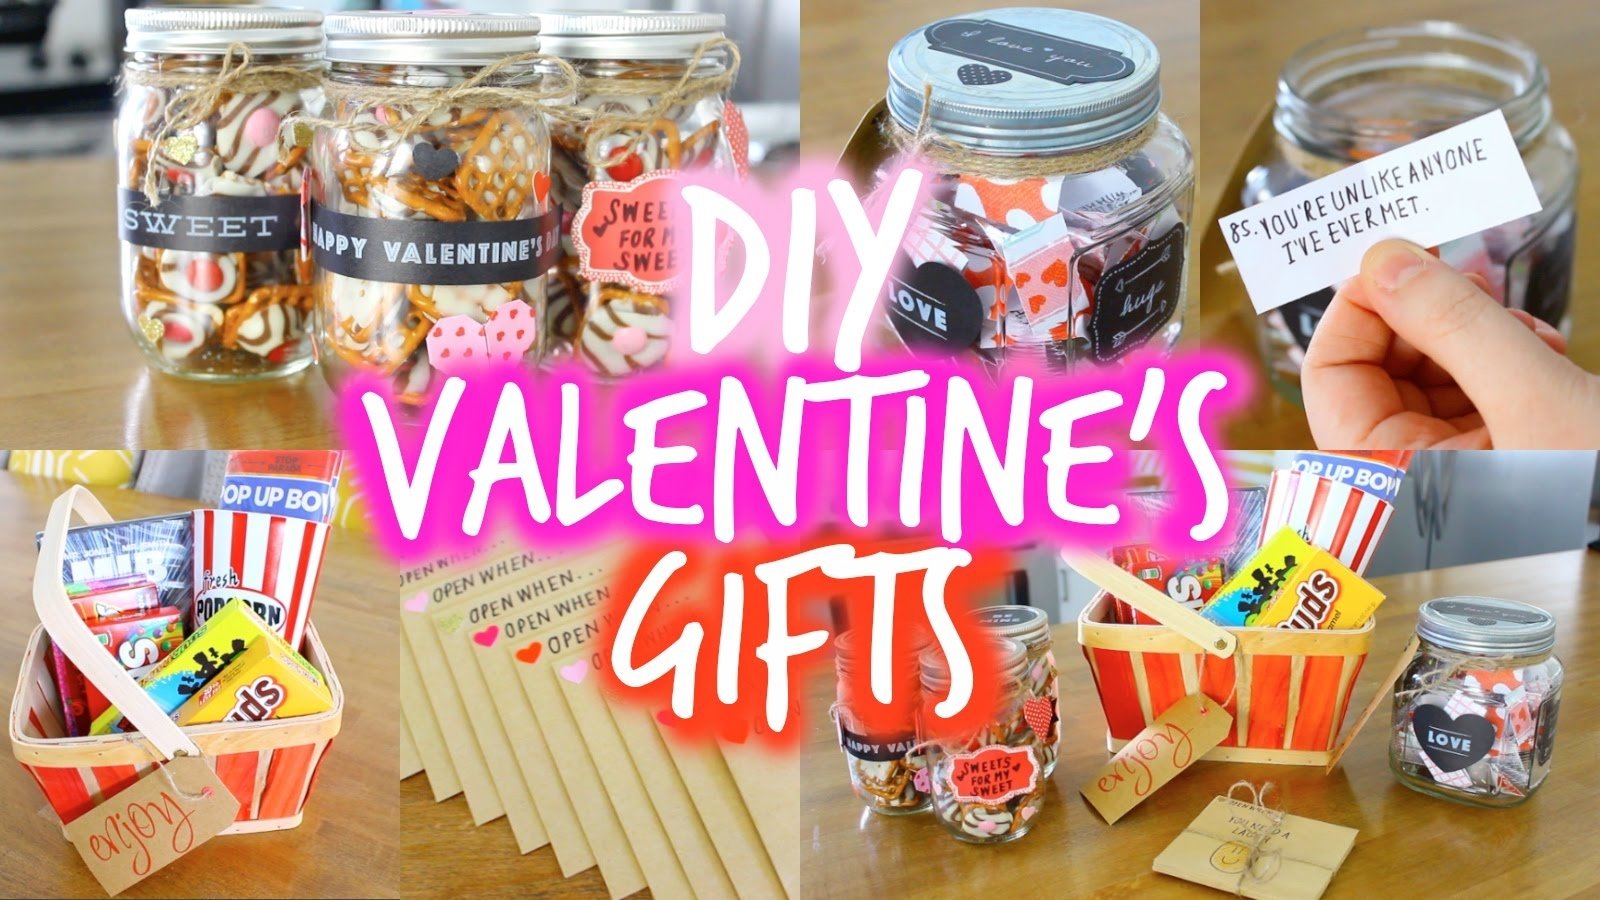 10 Famous Valentines Gift Ideas For Boyfriends easy diy valentines day gift ideas for your boyfriend youtube 8 2022